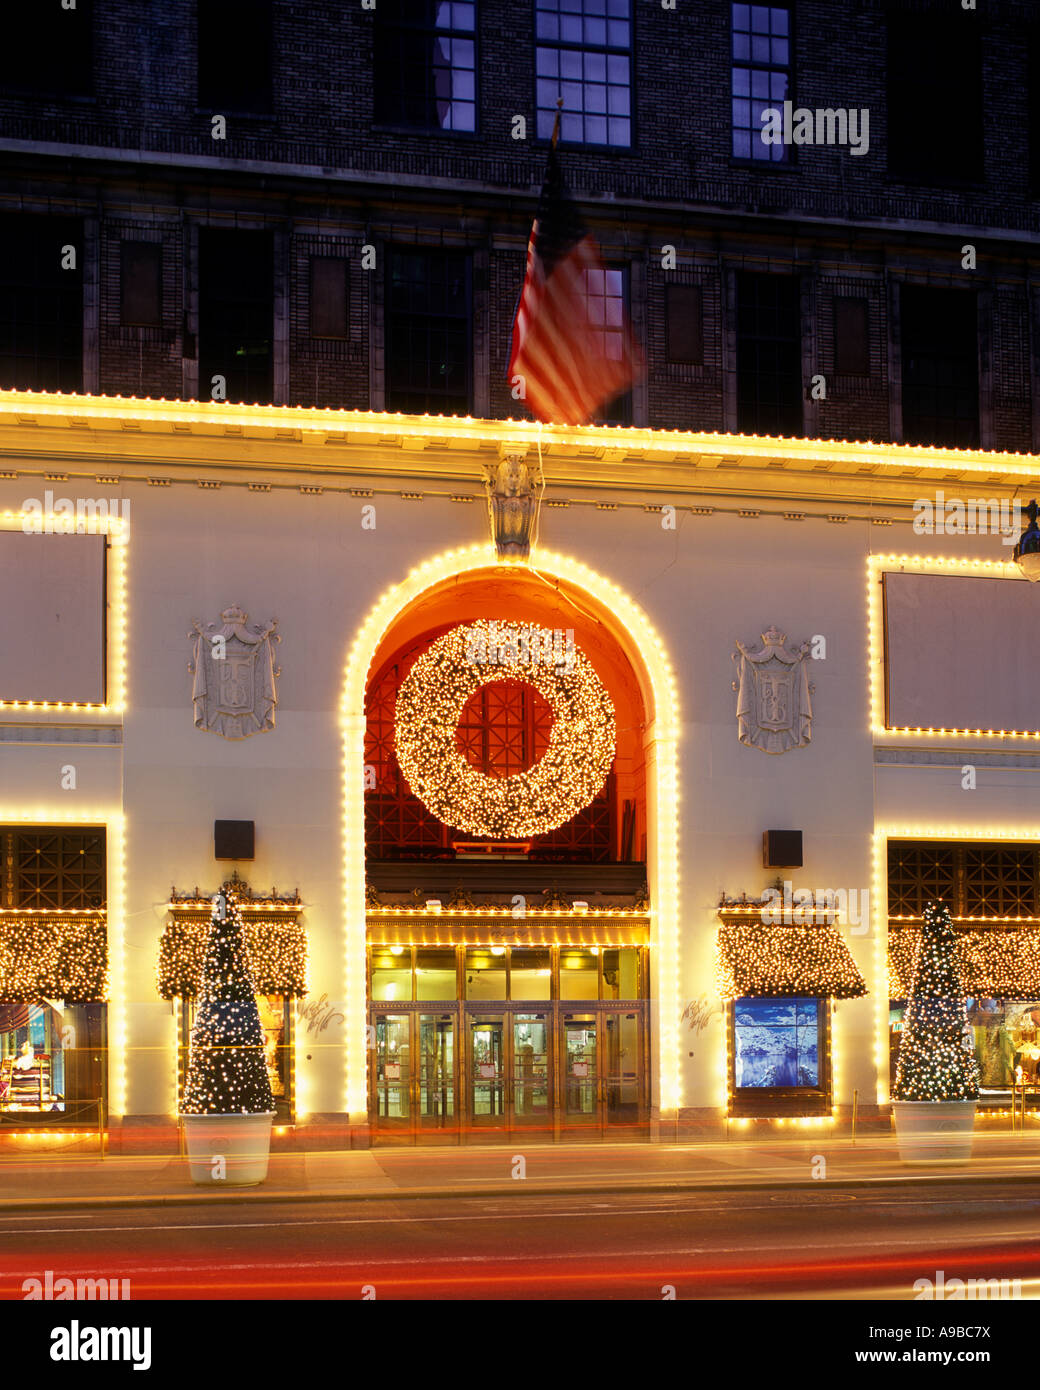 The Department Store Museum: Lord & Taylor